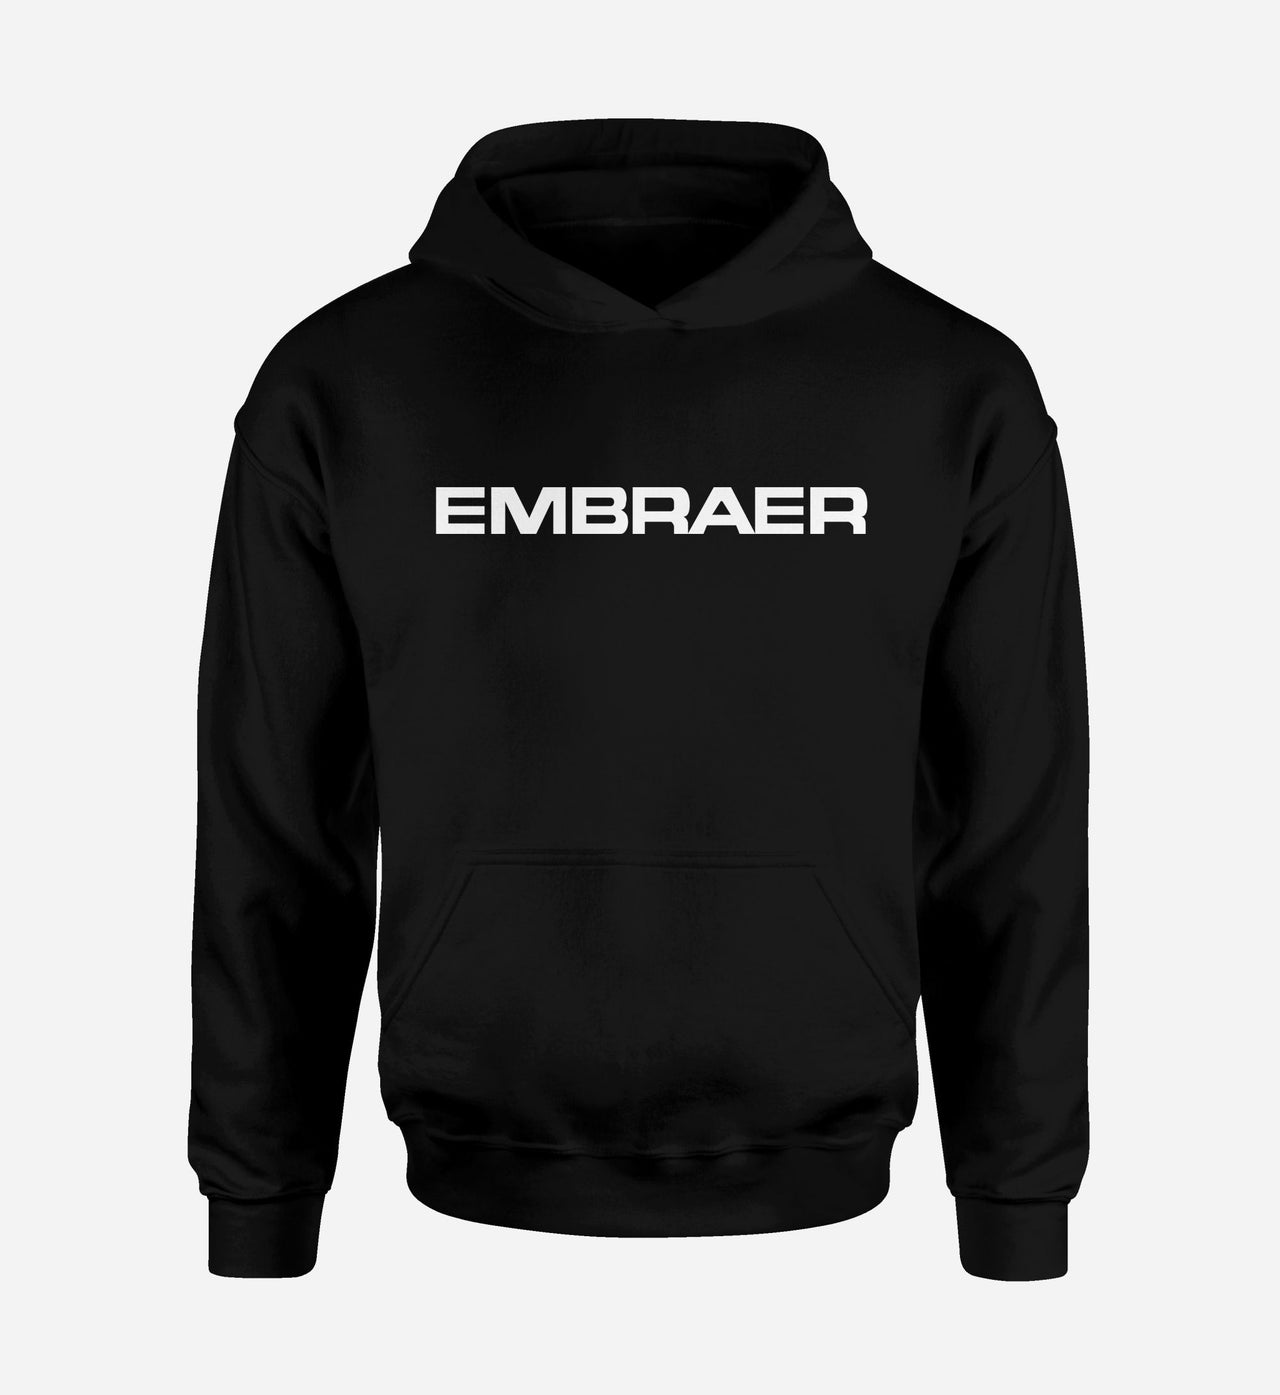 Embraer & Text Designed Hoodies